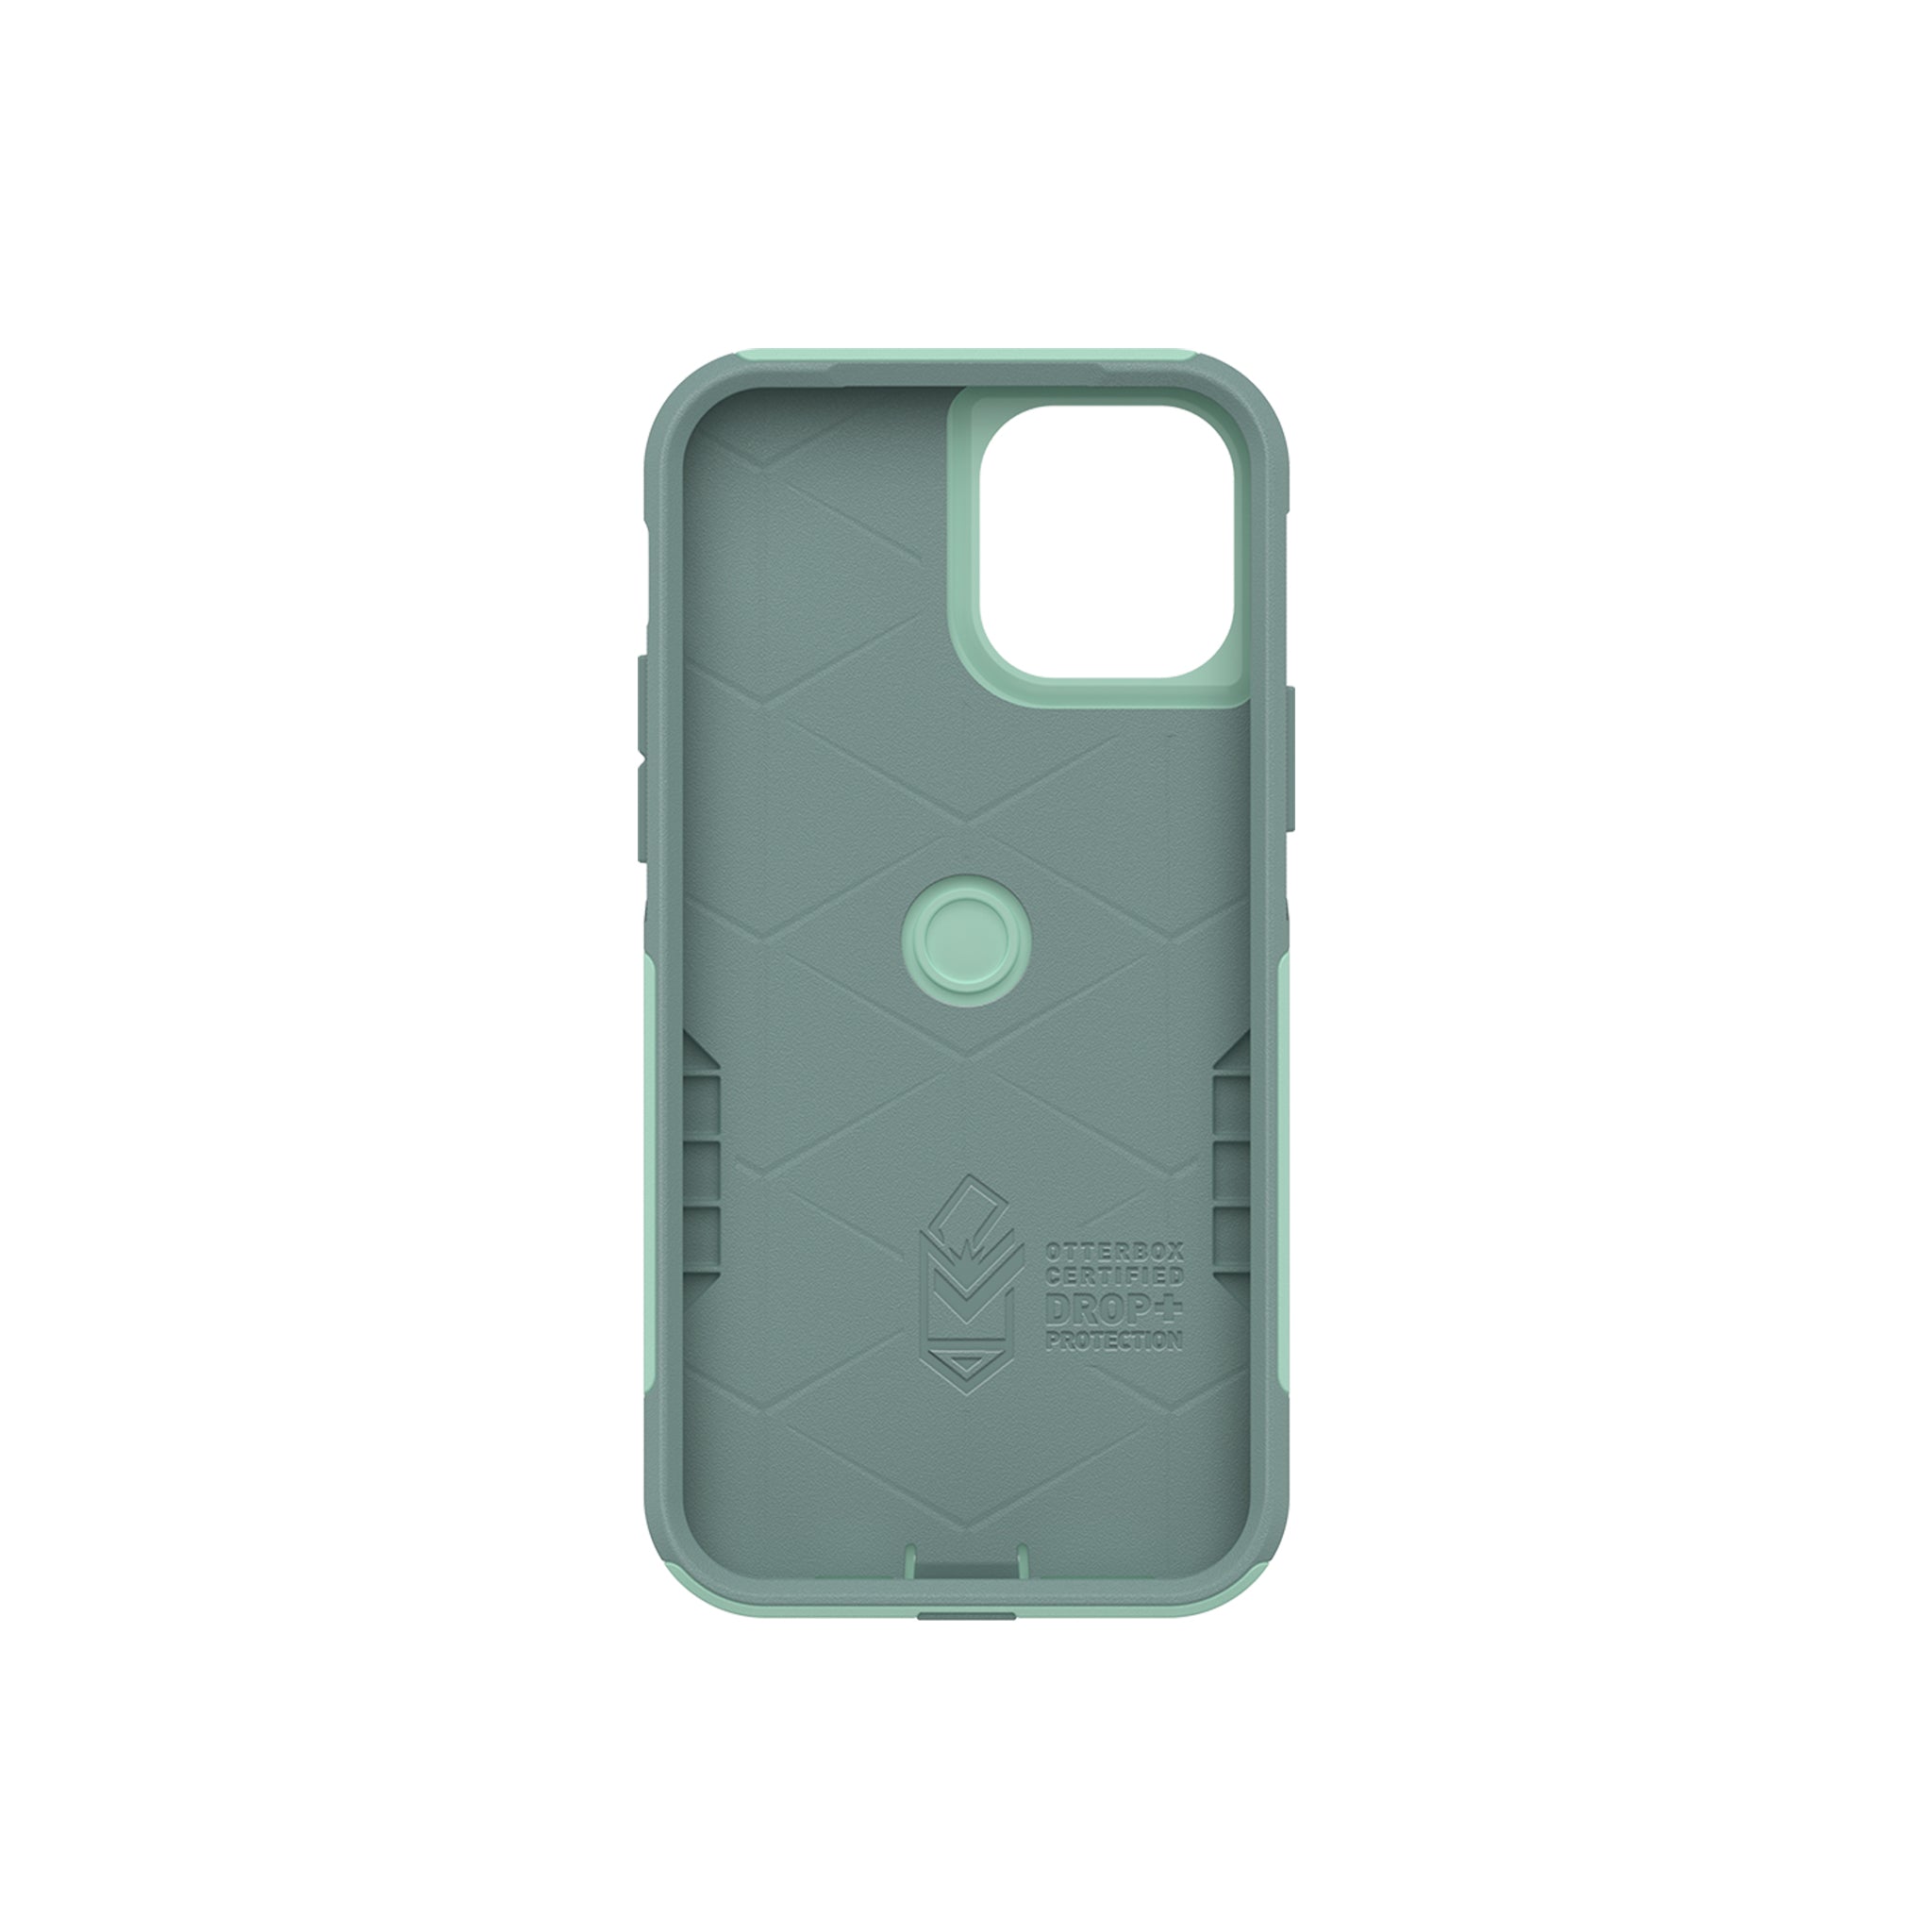 OtterBox - Commuter for iPhone 12 / 12 Pro - Ocean Way